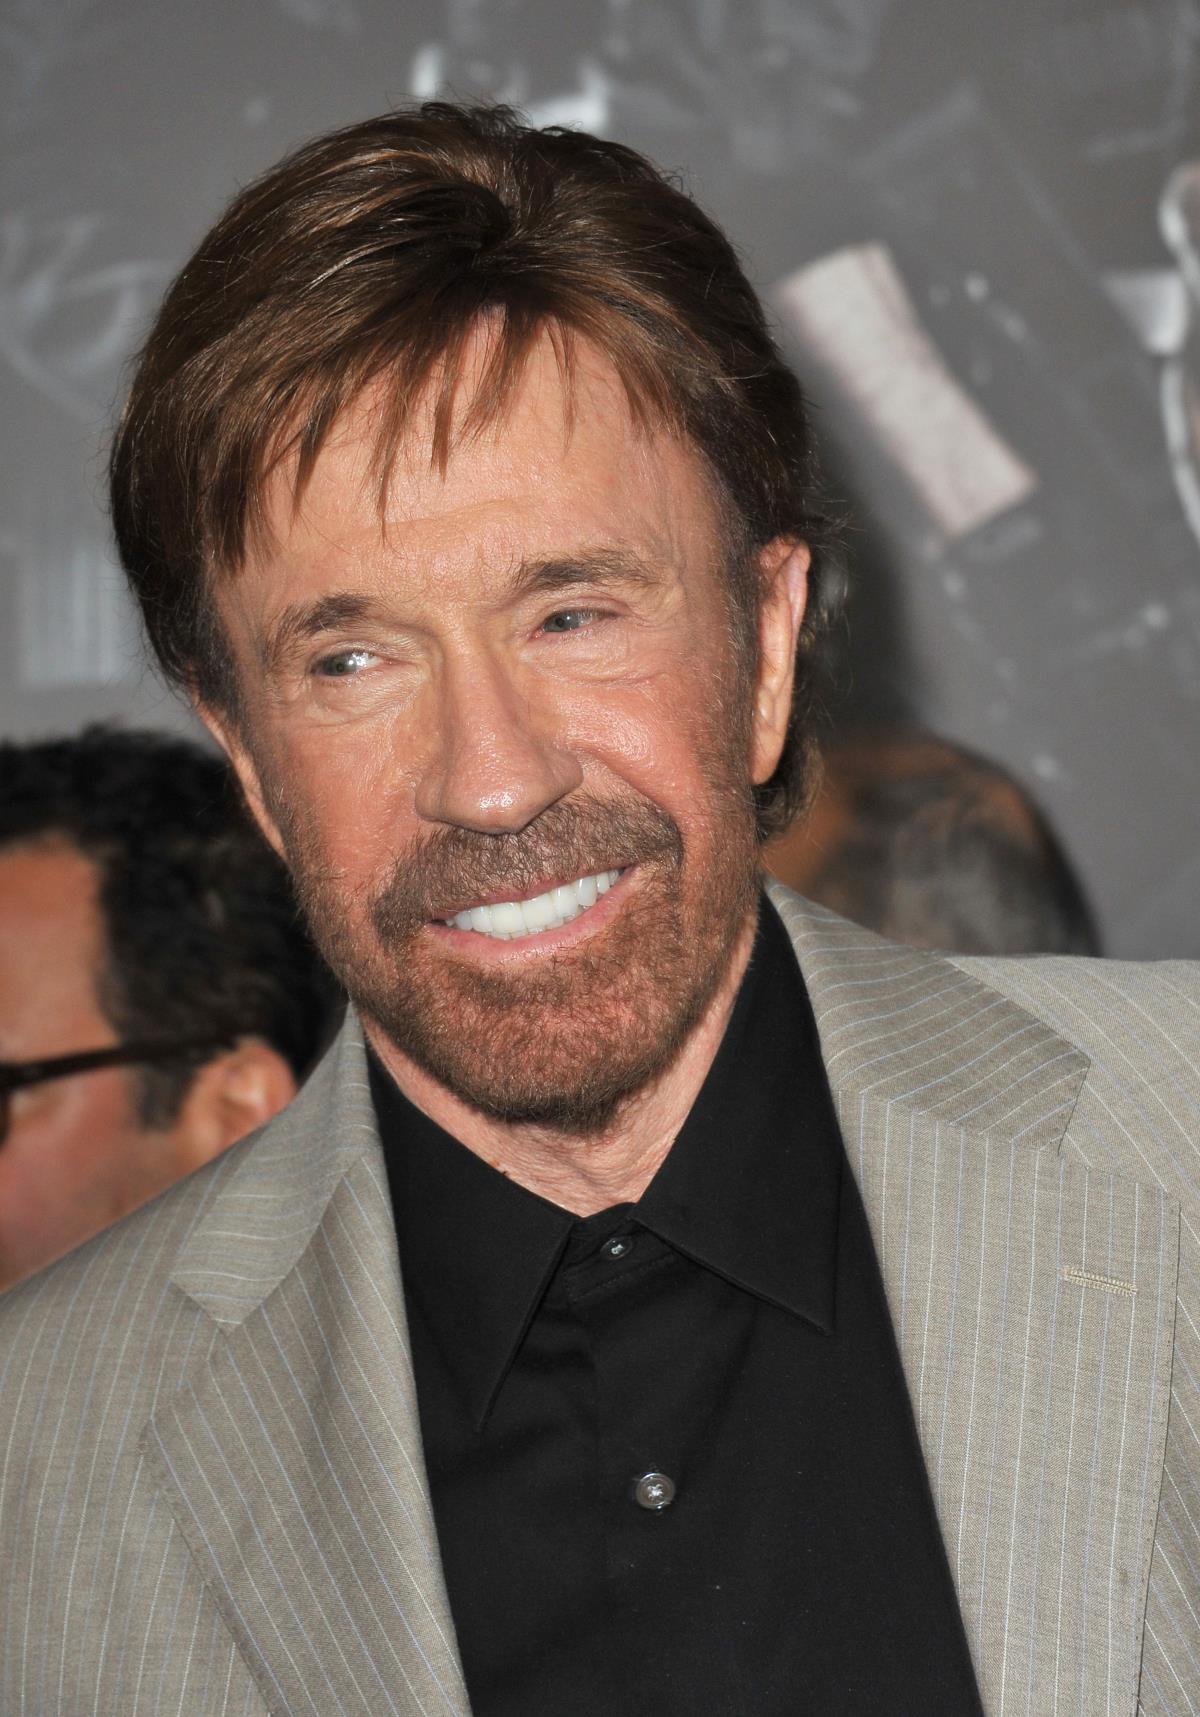 Image: Mass awakening: Chuck Norris and other celebrities are speaking about chemtrails